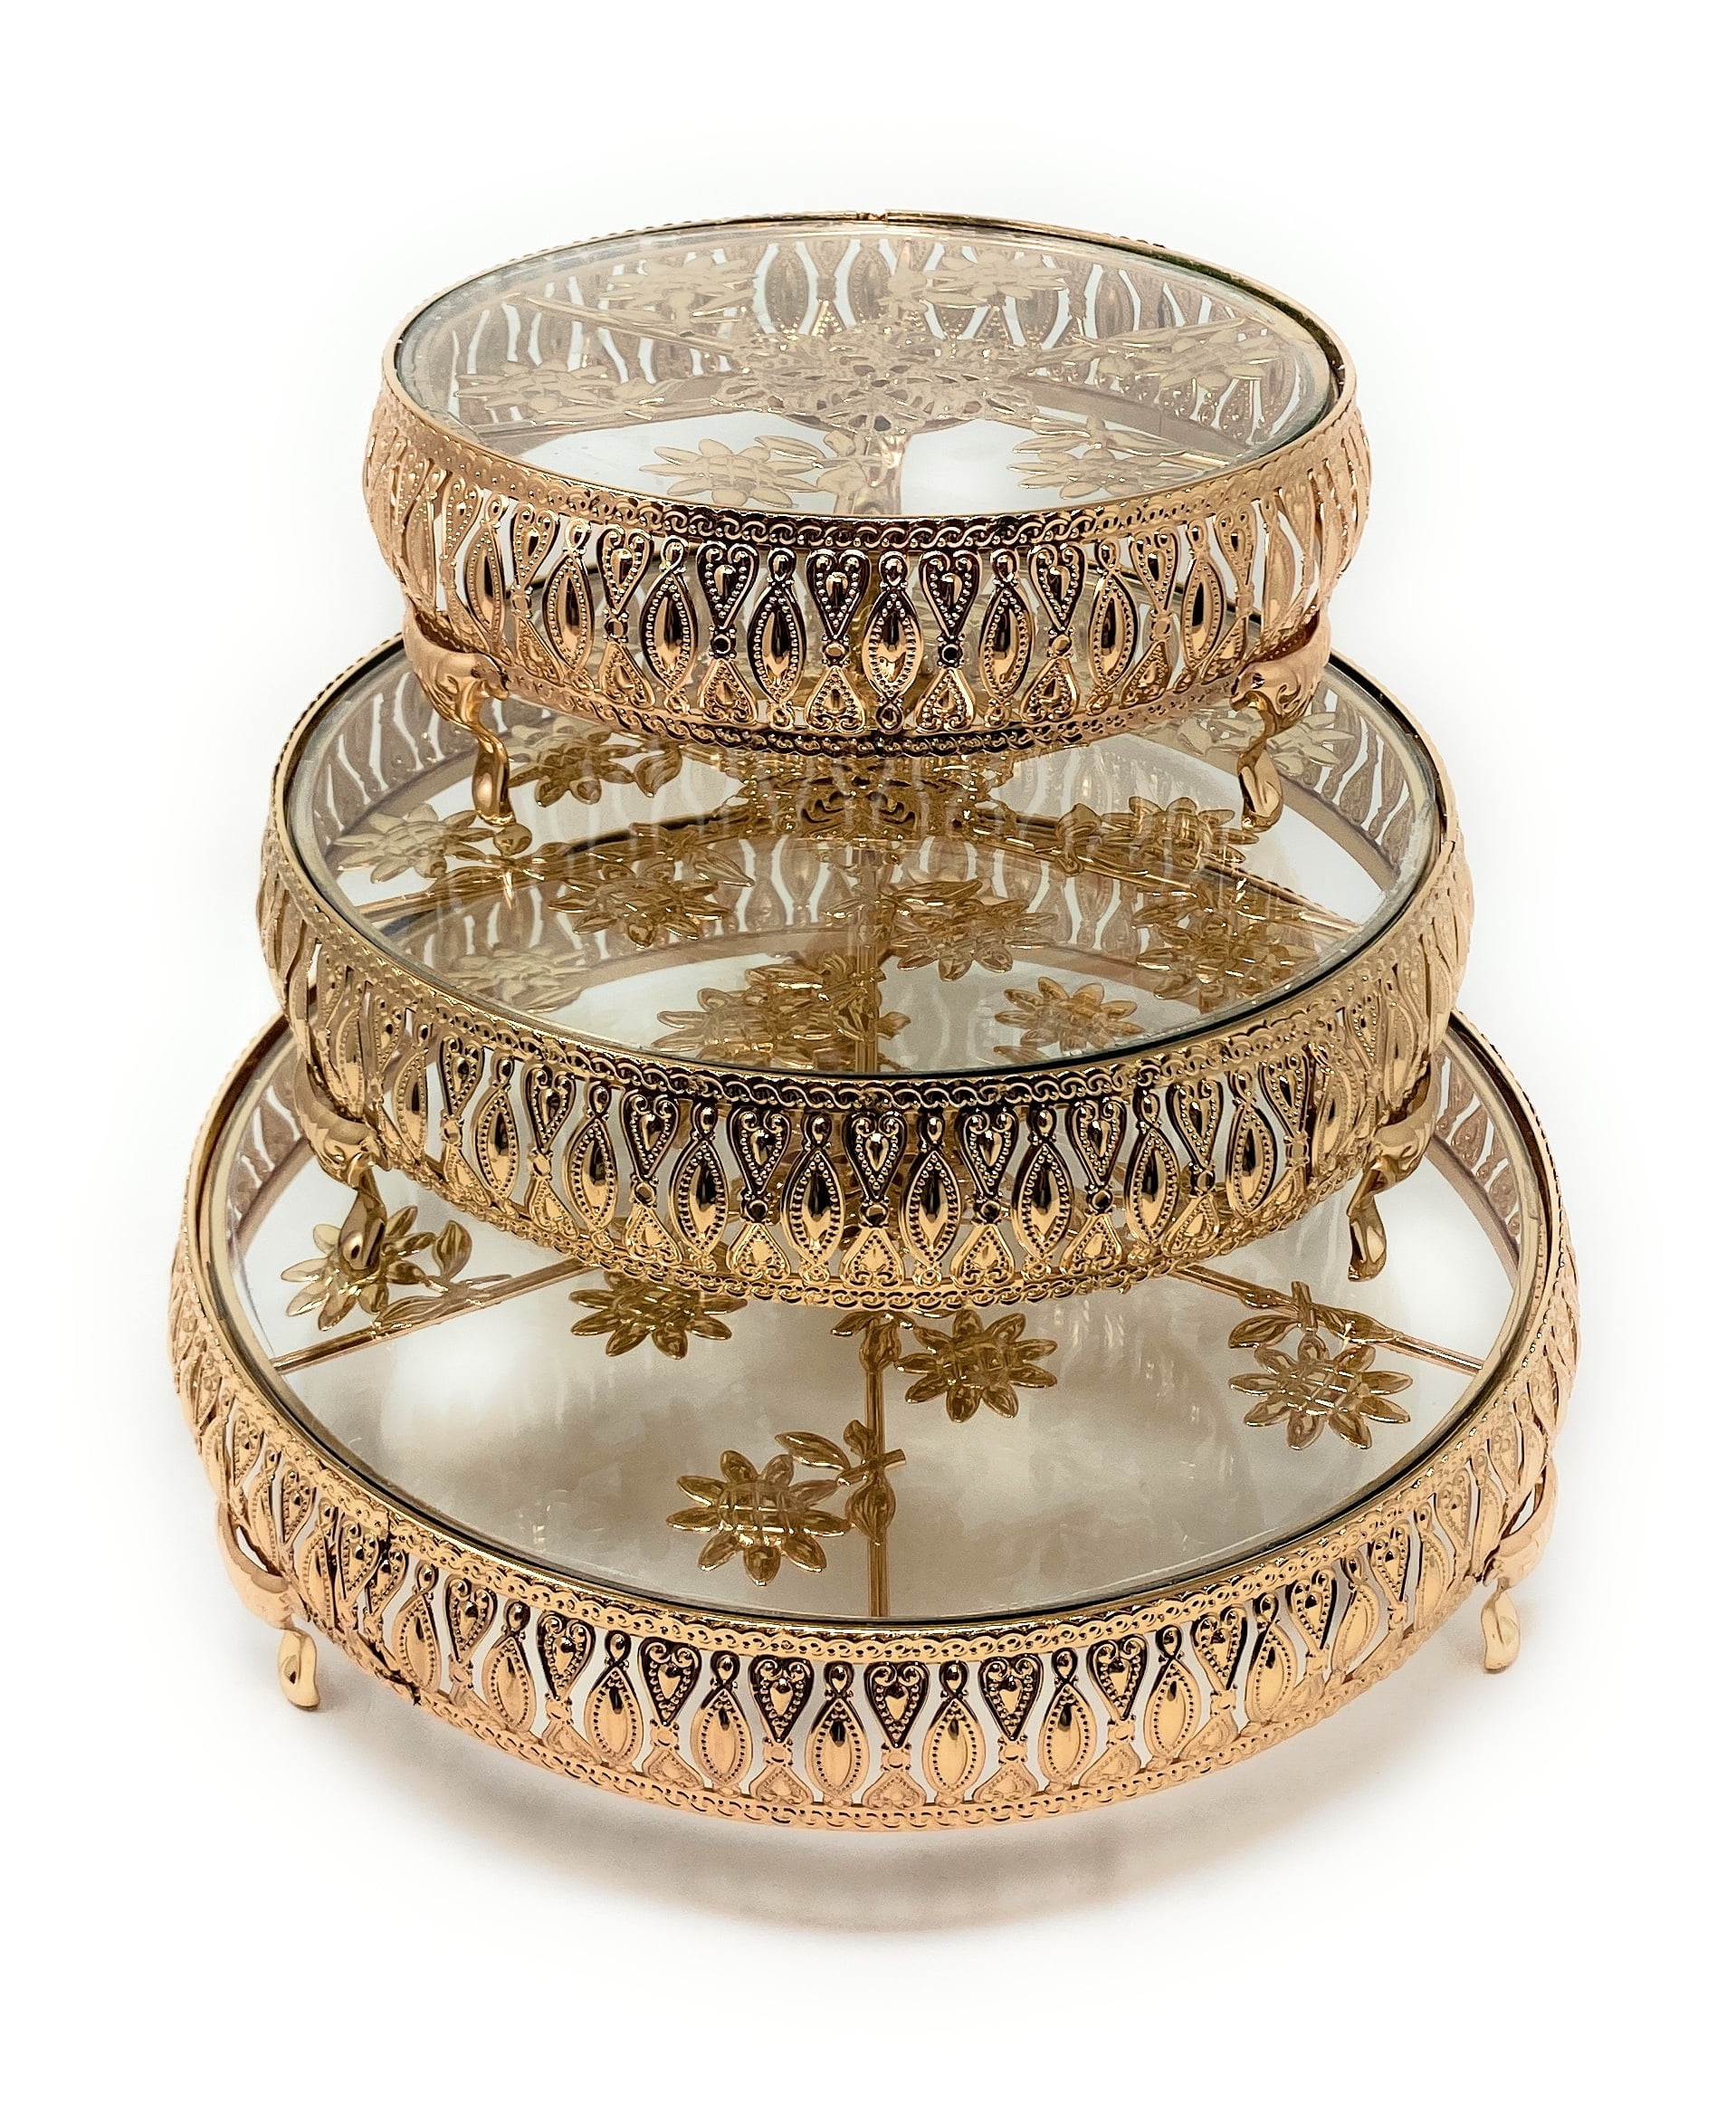 Gold Wedding Cake Stand Set of 3 Glass Top Round Ornate Metal Plateau Riser 